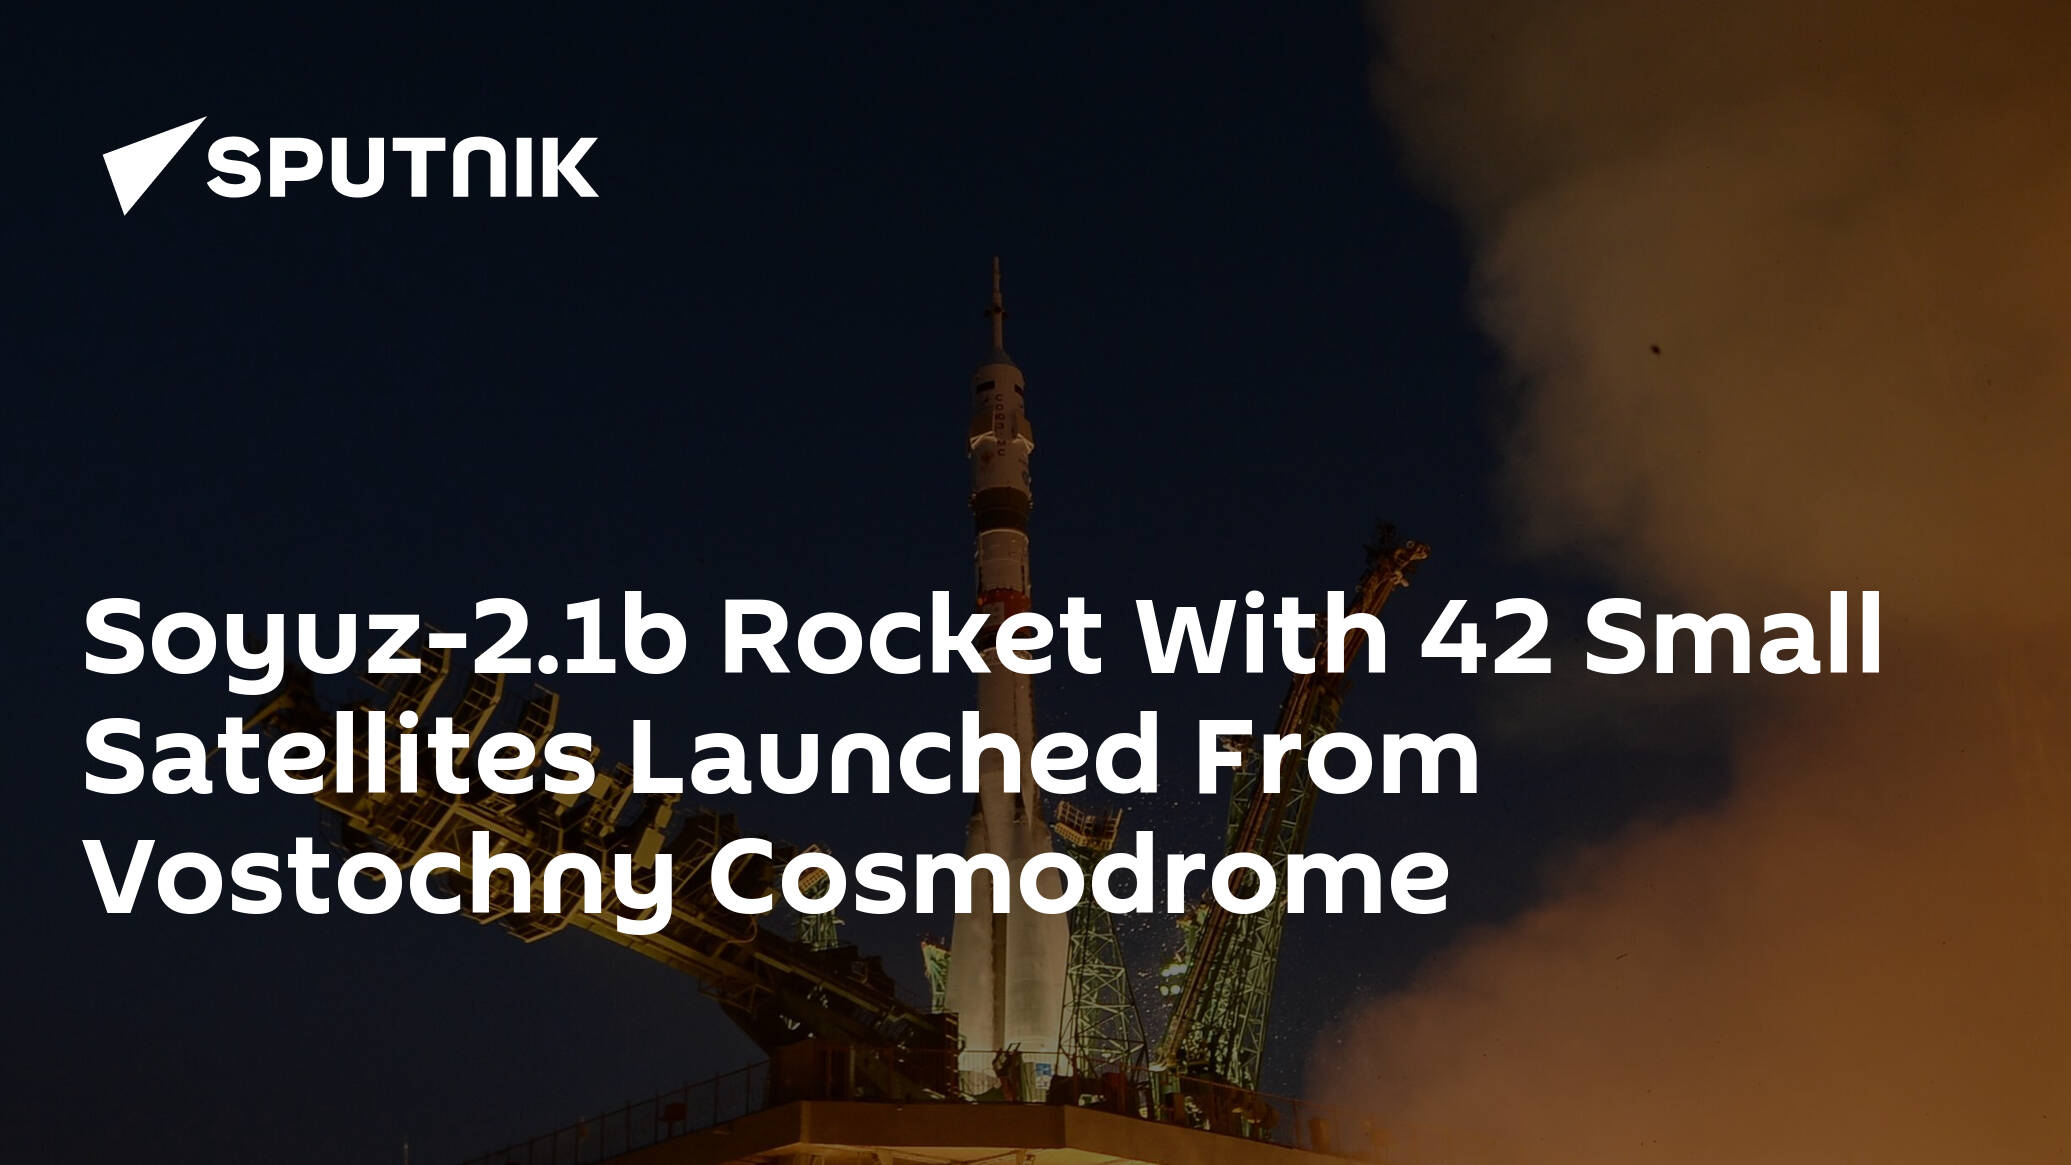 Soyuz-2.1b Rocket With 42 Small Satellites Launched From Vostochny Cosmodrome